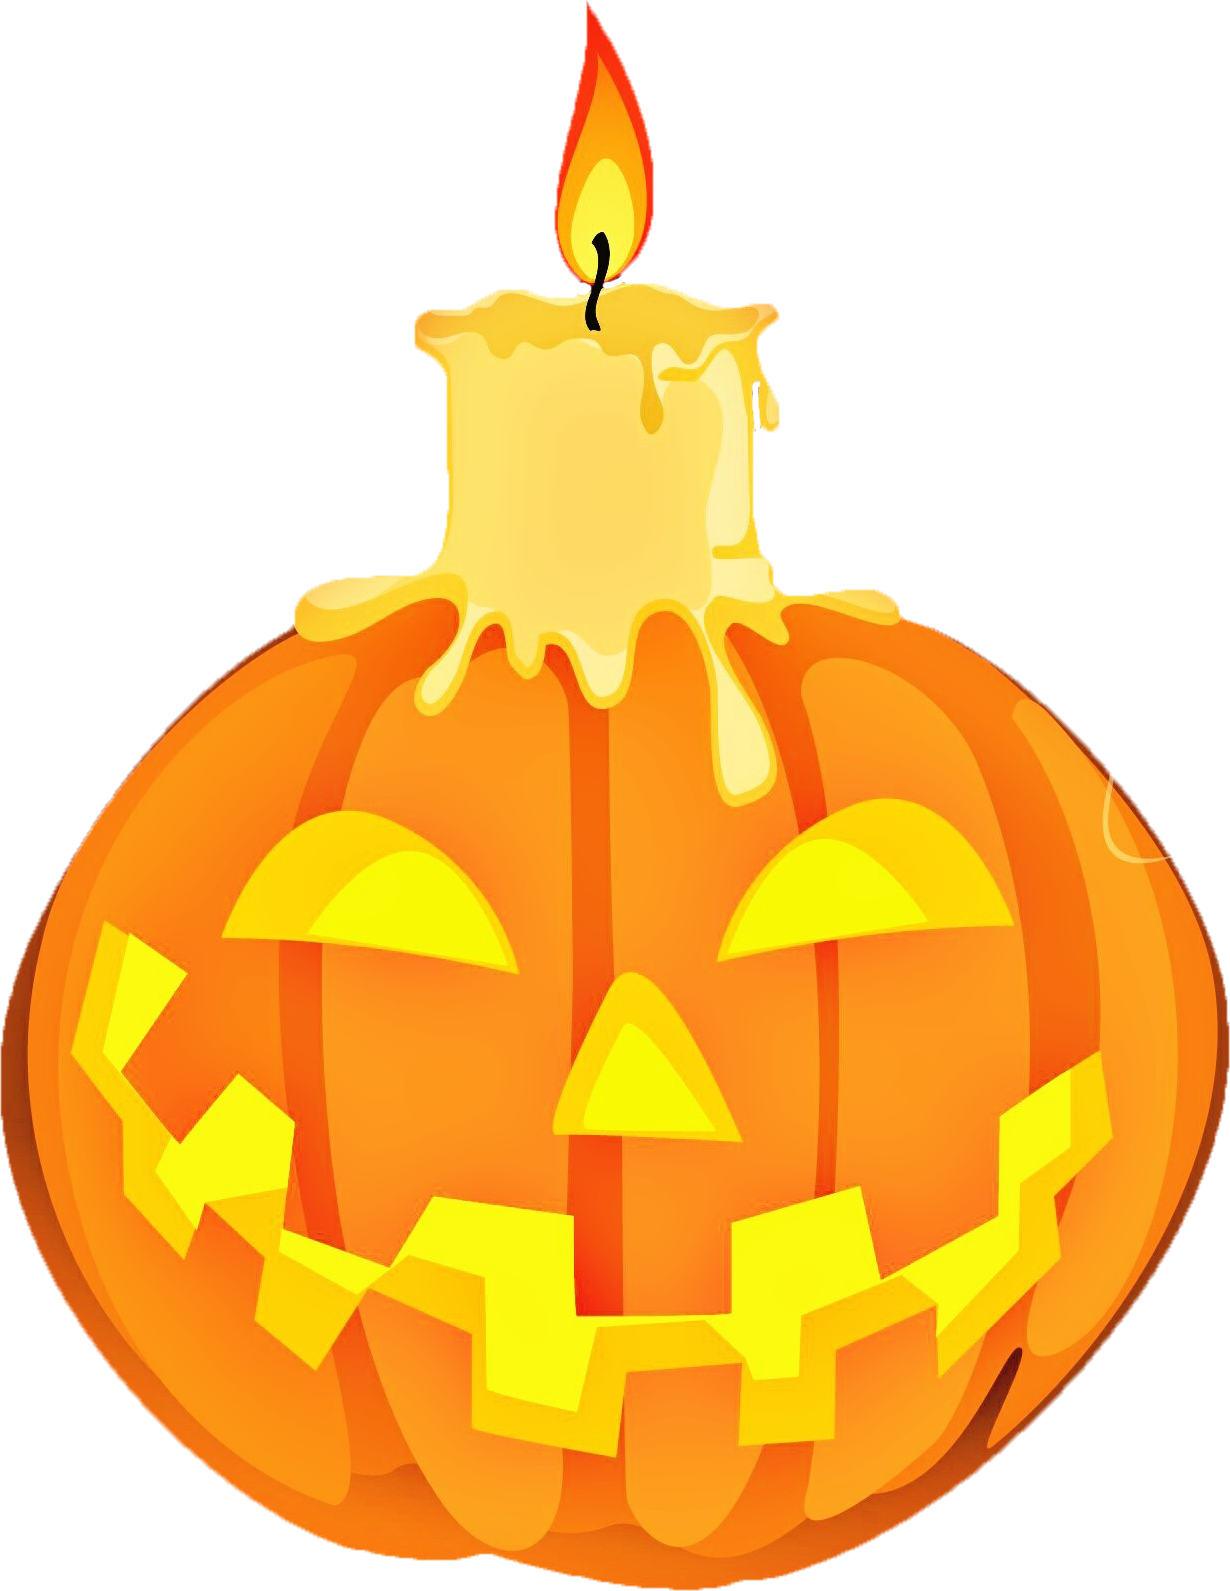 Halloween png images. Jack o lantern and